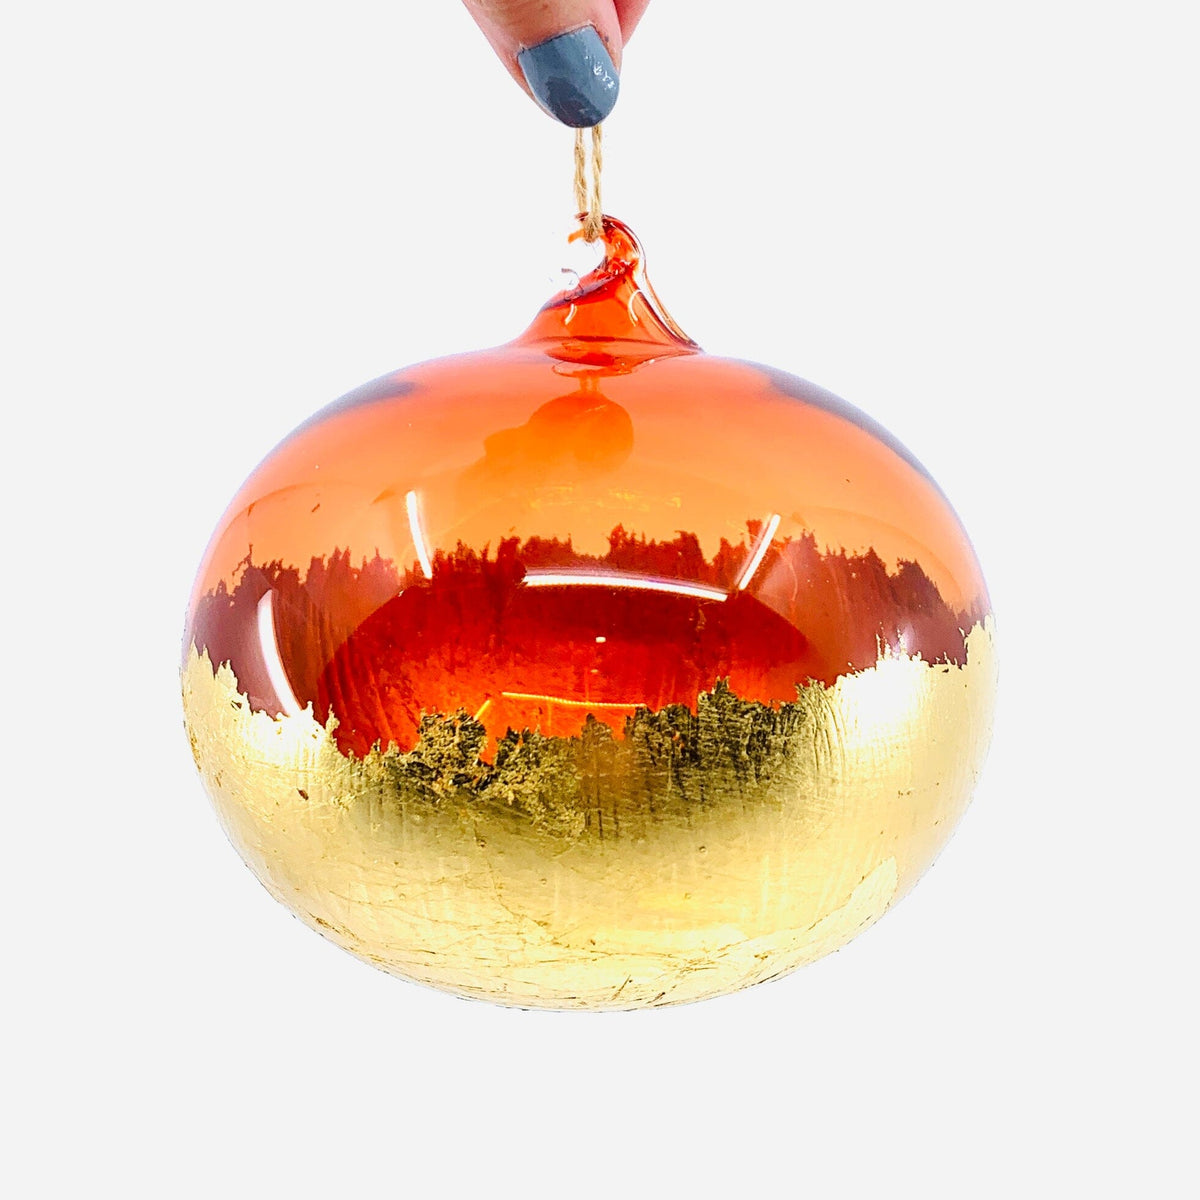 Rainbow Gold Dipped Orb Ornament One Hundred 80 Degrees G 